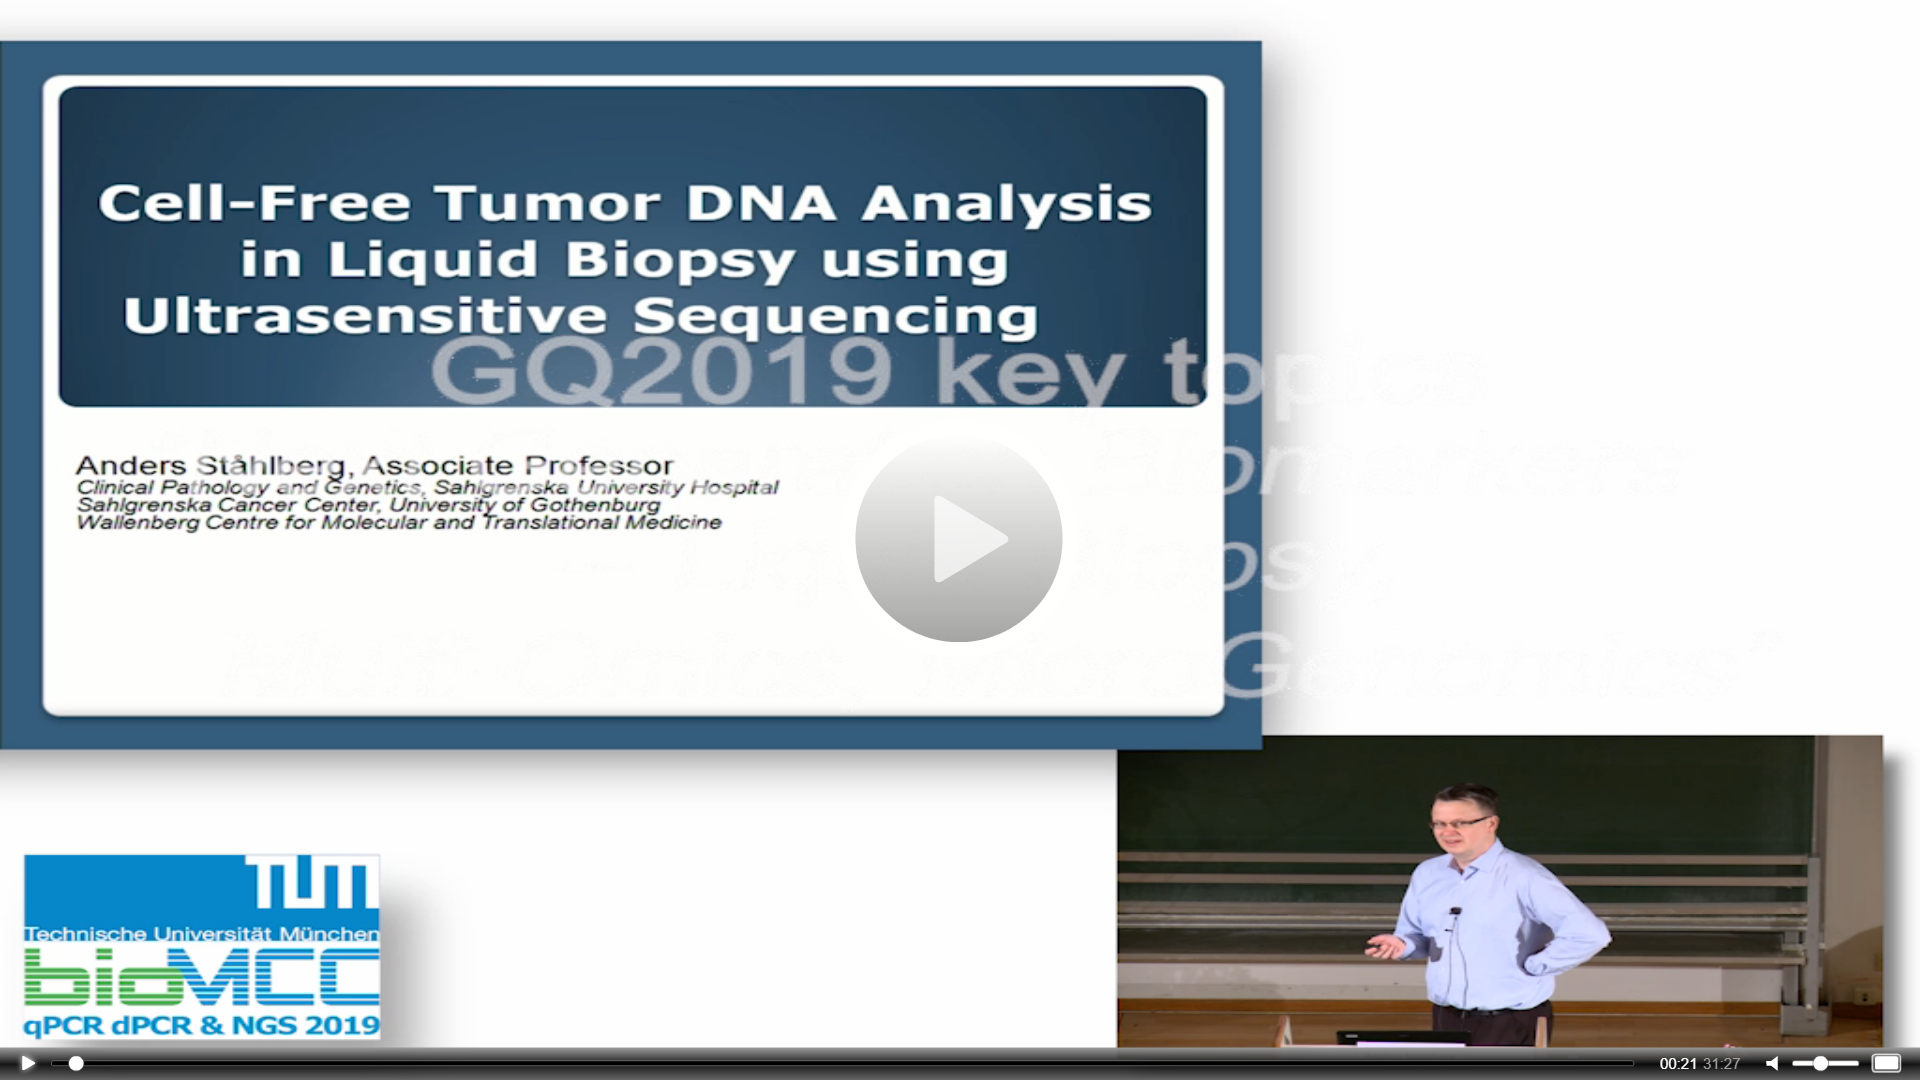 Cell-Free Tumor DNA Analysis In Liquid Biopsy Using Ultrasensitive Sequencing